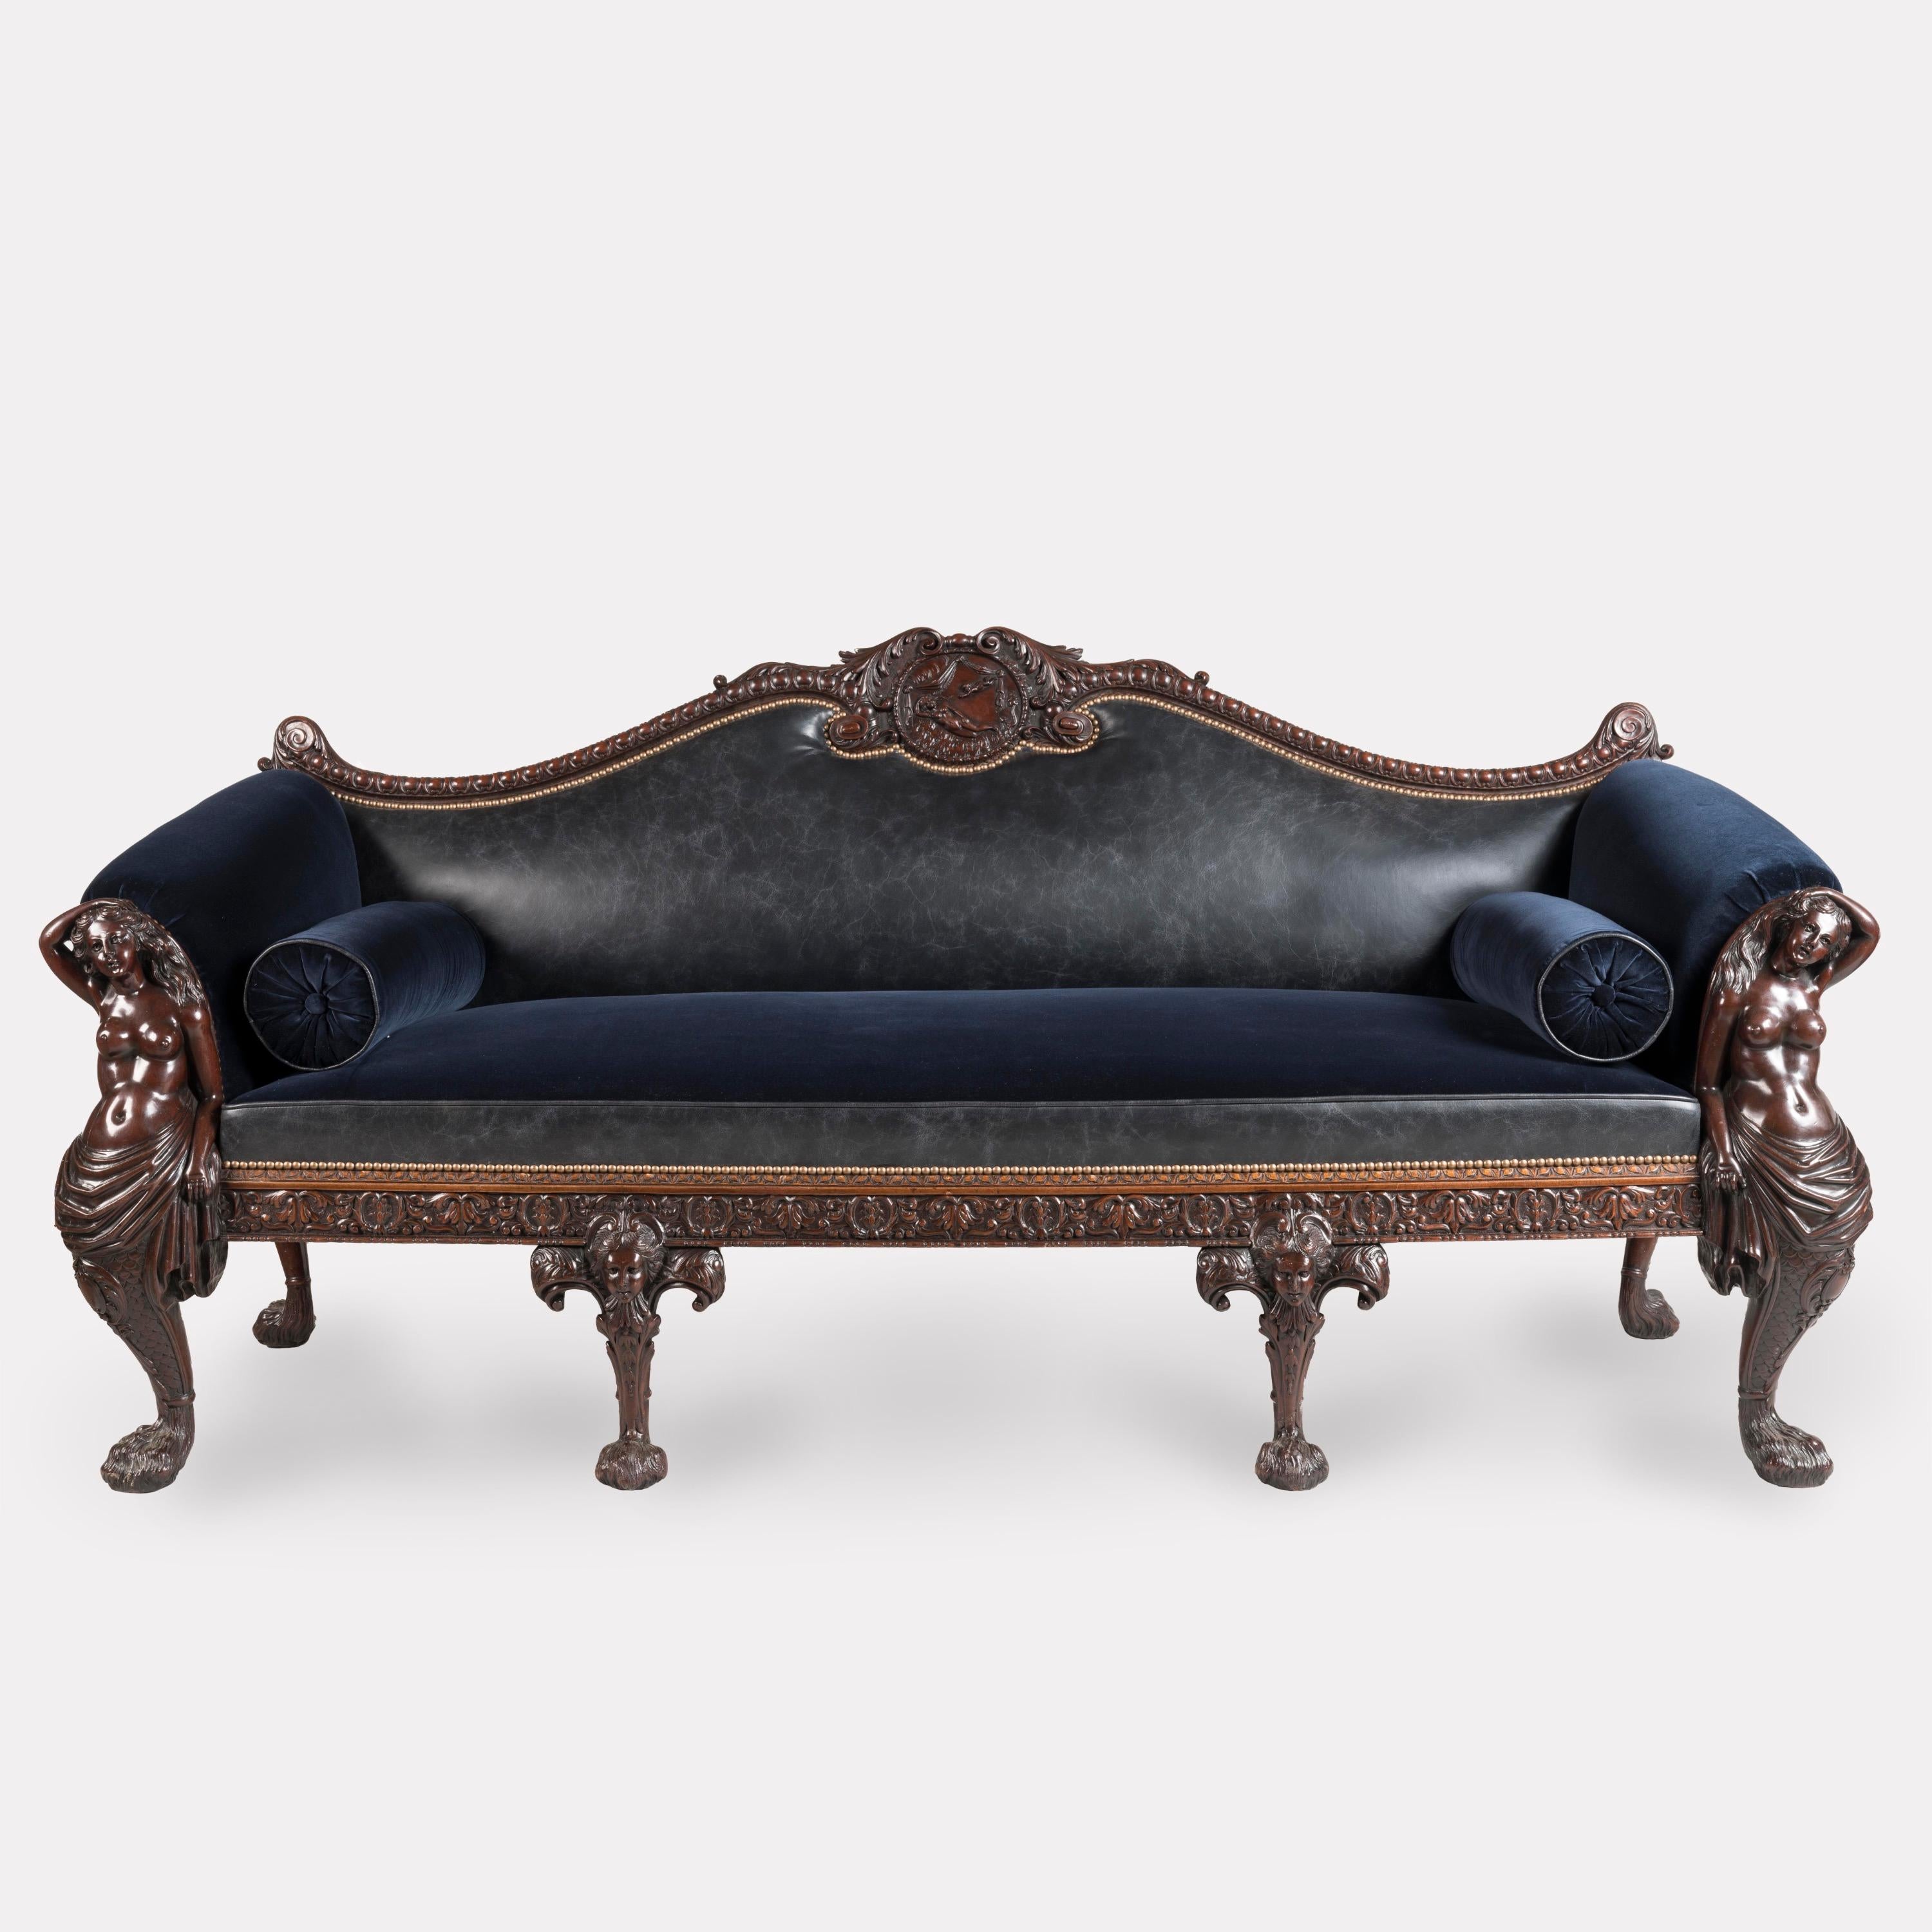 A Very Fine Settee After a Design by William Linnell 
Firmly Attributed to Maple & Company of London

The mahogany settee has the end arm supports carved with recumbent mermaids, terminating in Georgian style 'hairy paw feet', the centre legs carved